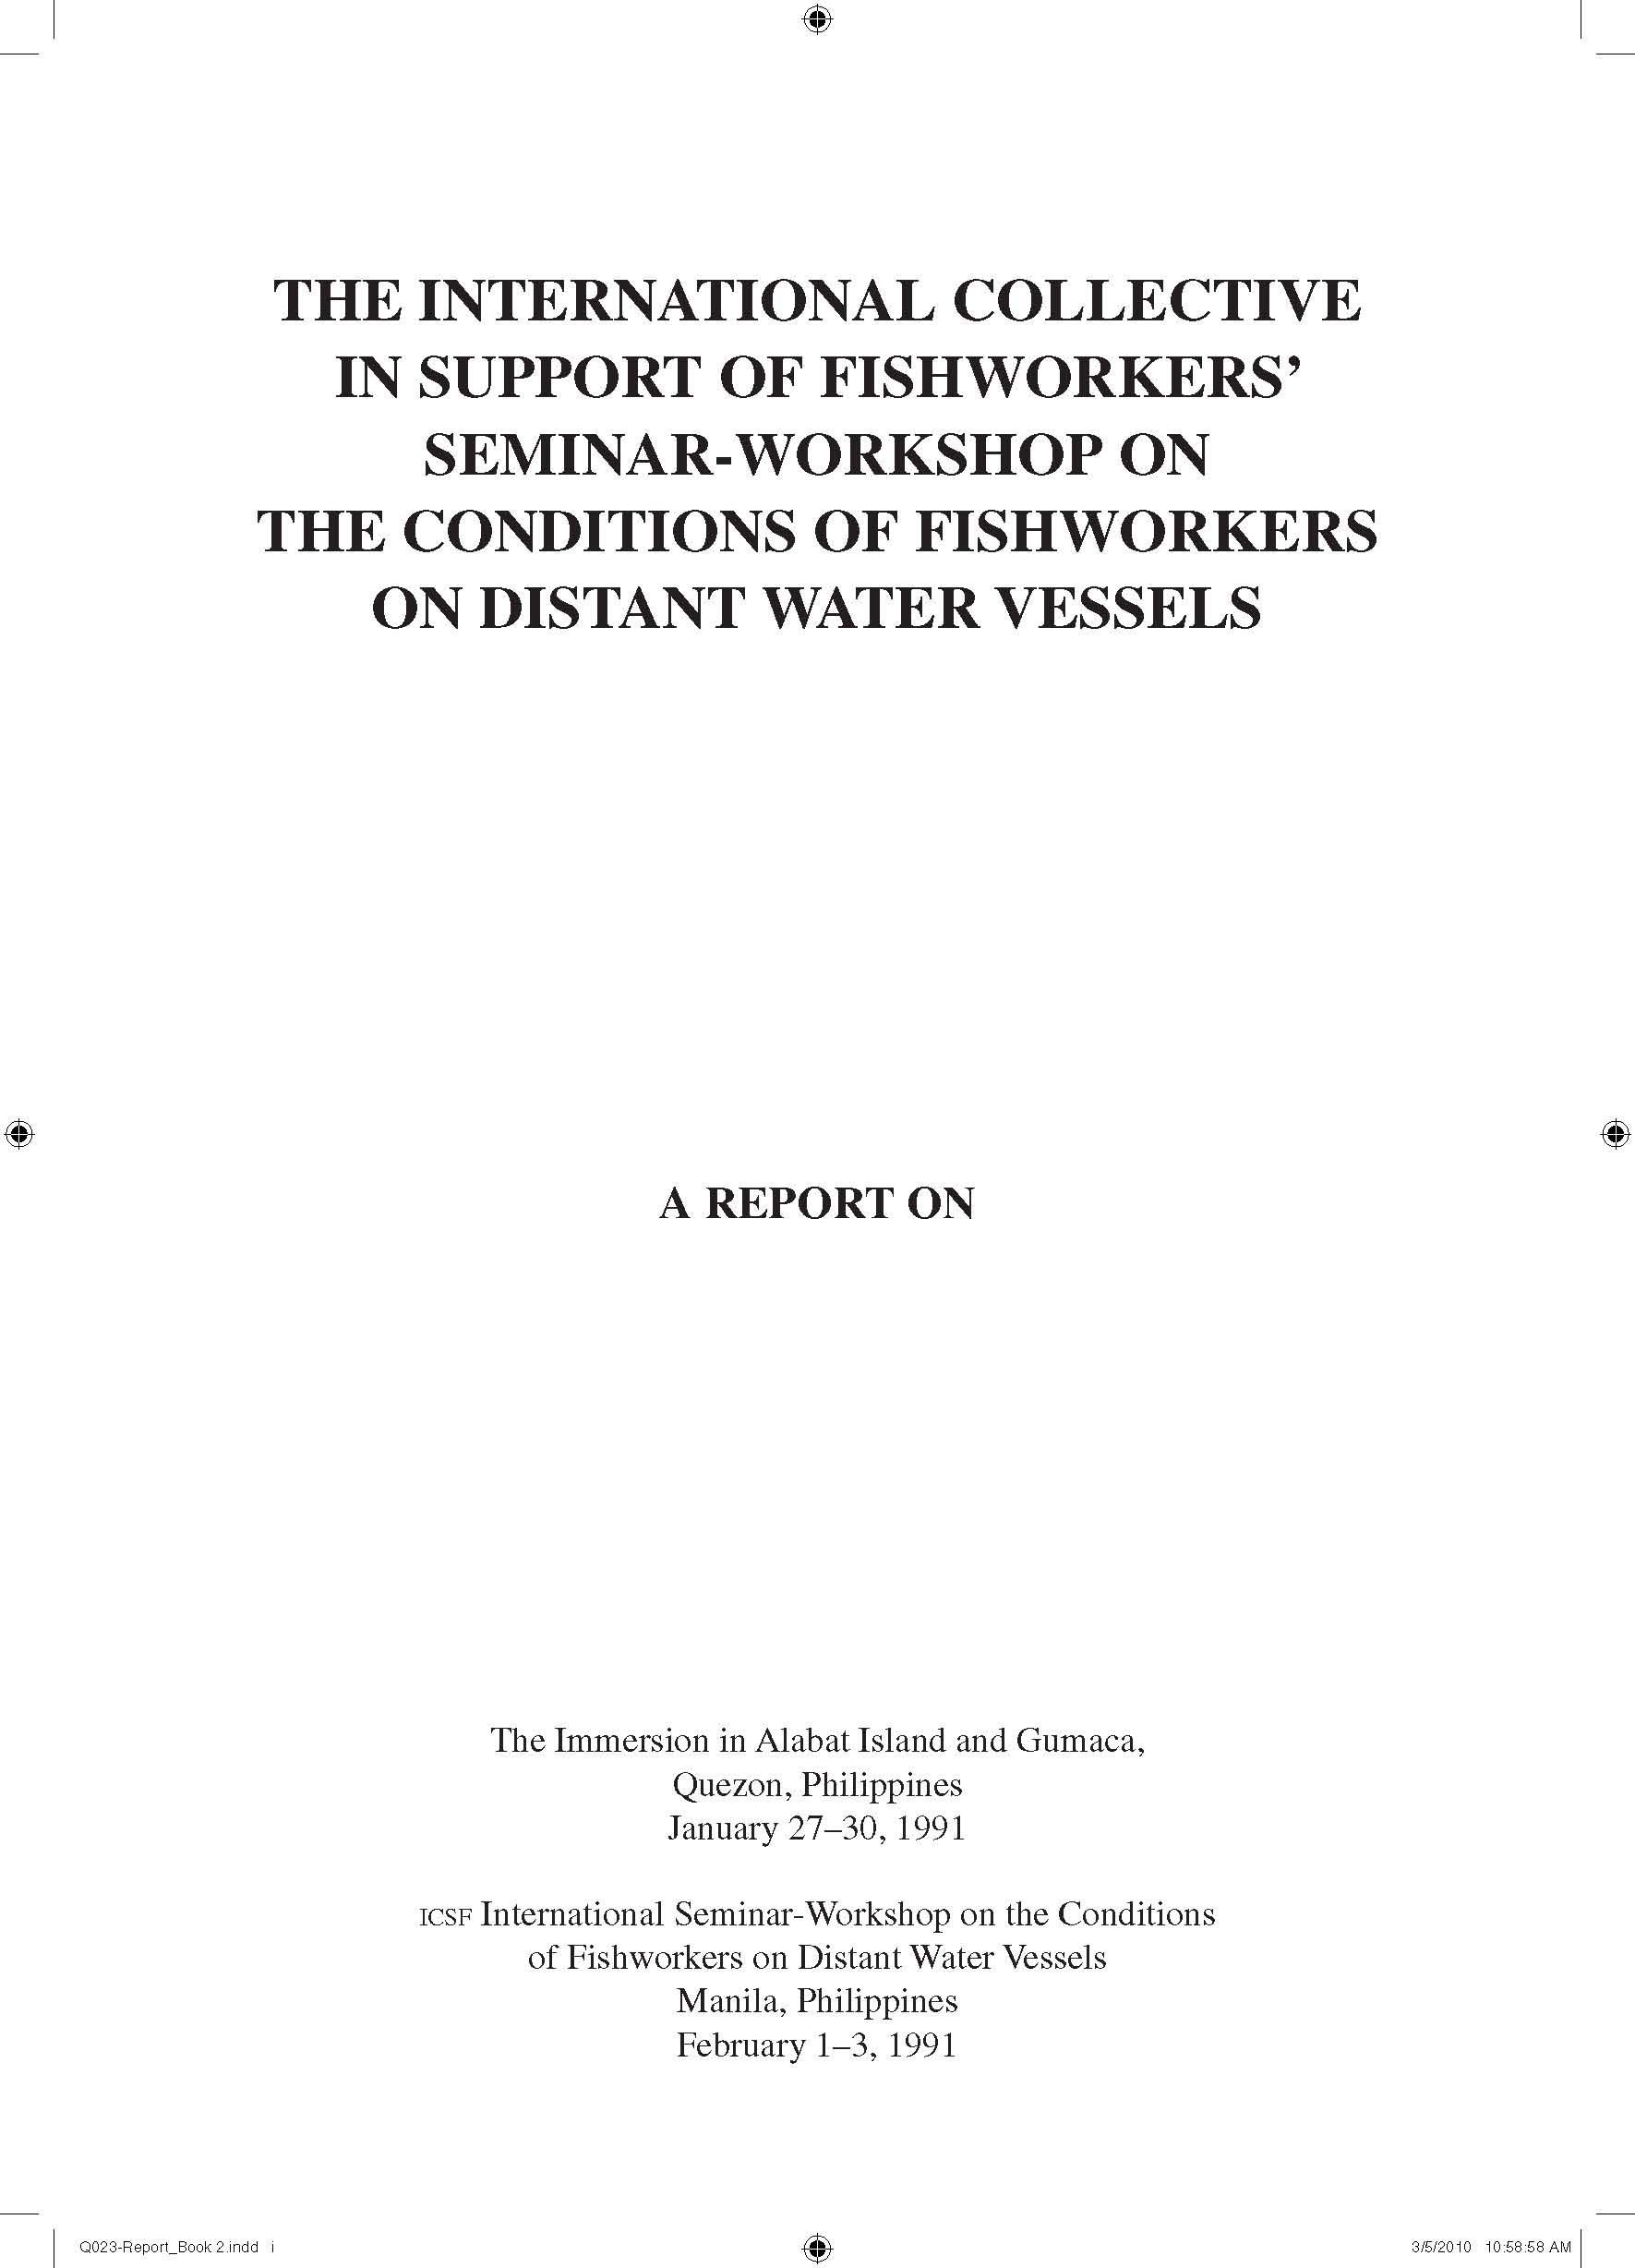 Seminar-Workshop on the Conditions of Fishworkers on Distant Water Vessels Manila, Philippines,  February 1 to 3, 1991